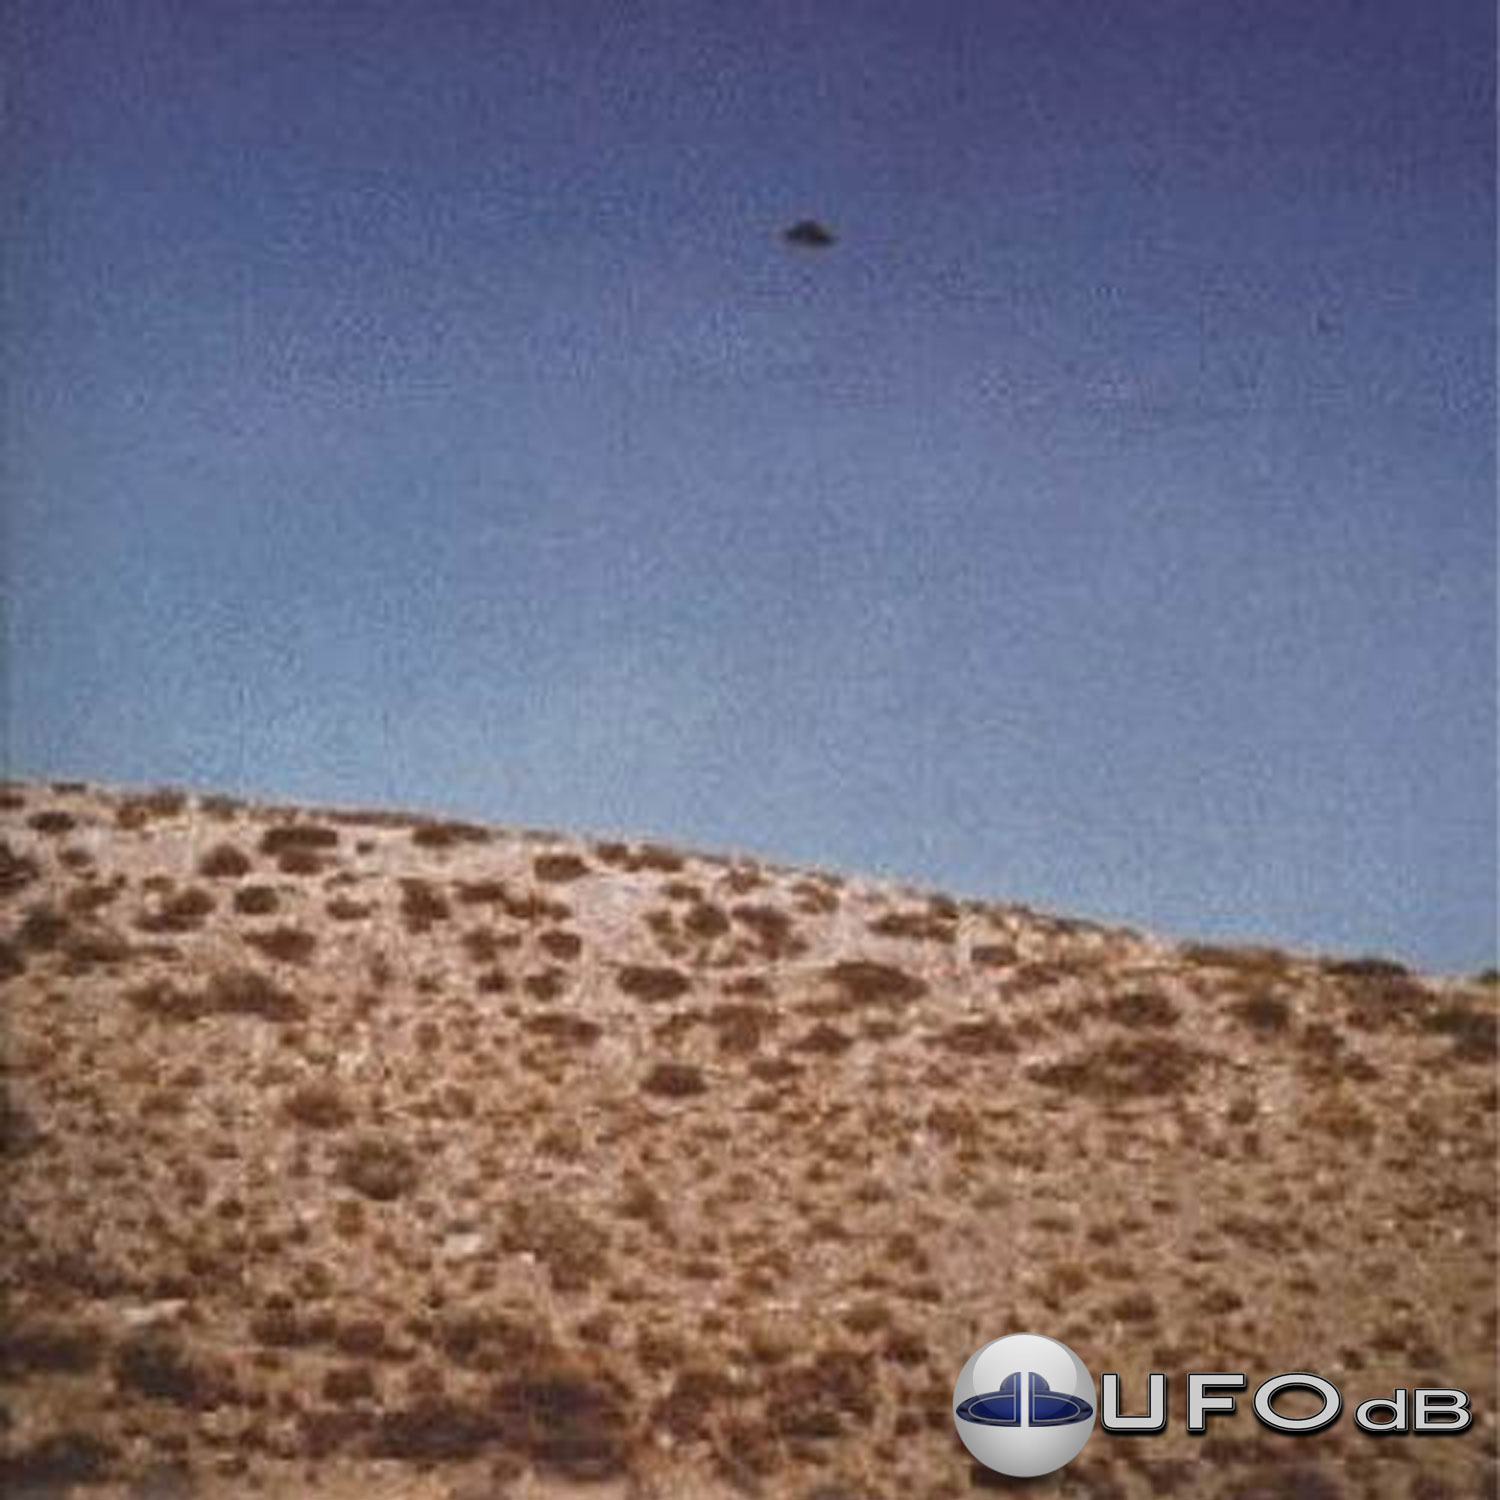 UFO seen over the Valdes peninsula near the city of Puerto Madryn UFO Picture #27-1